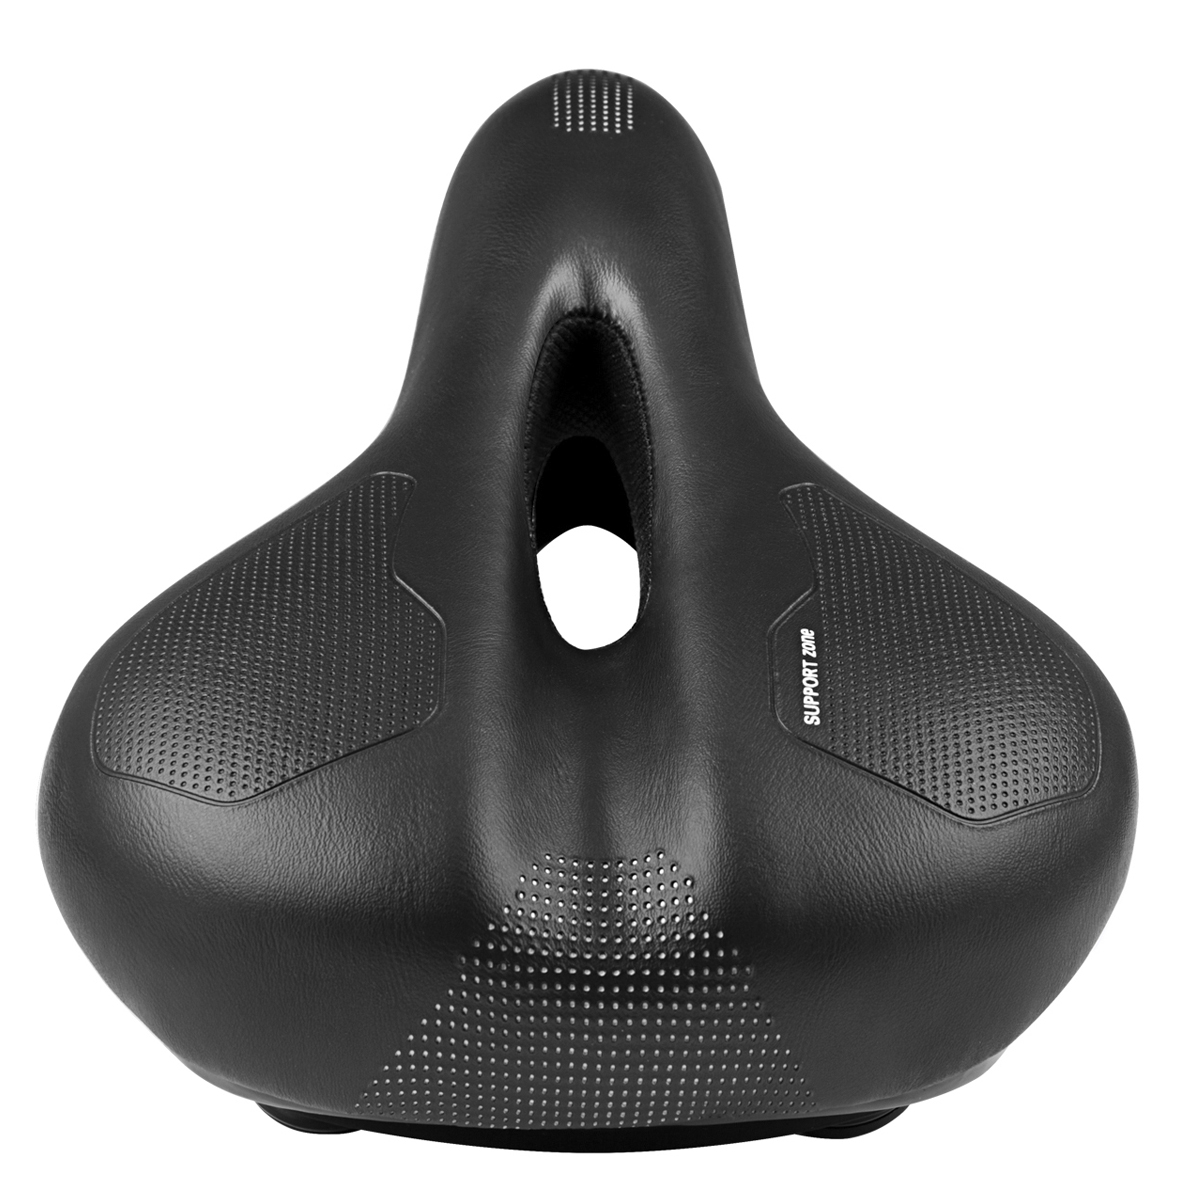 

WHEEL UP Breathable Hollow Suspension Bicycle Saddle Comfort Wide MTB Bike Cycling Gel Seat Saddle Seat Pad